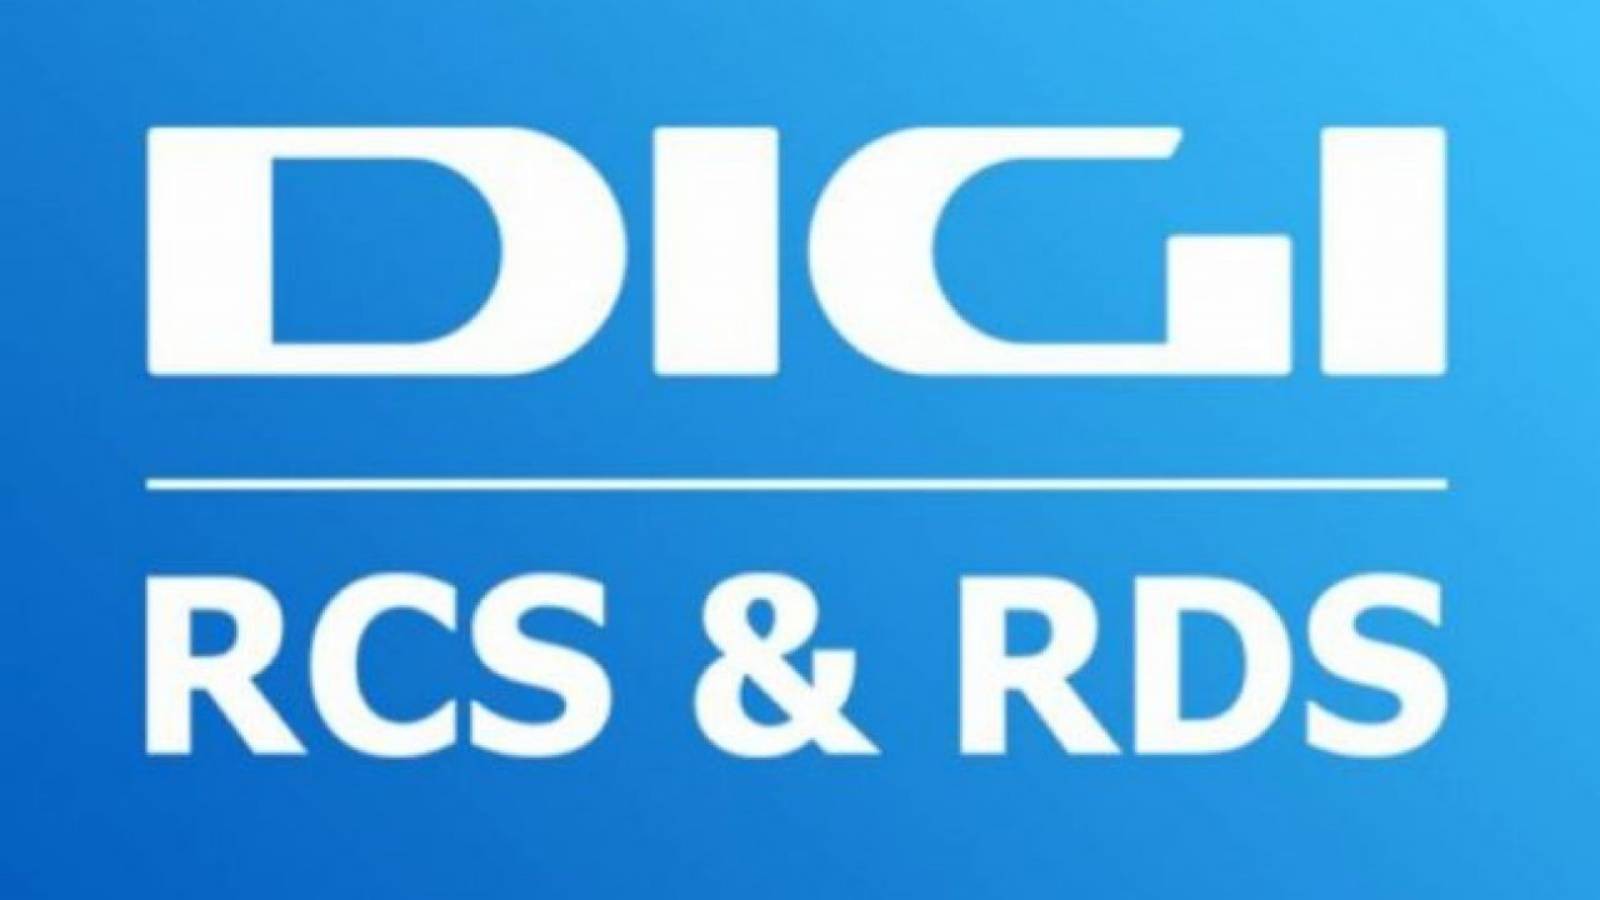 RCS & RDS business